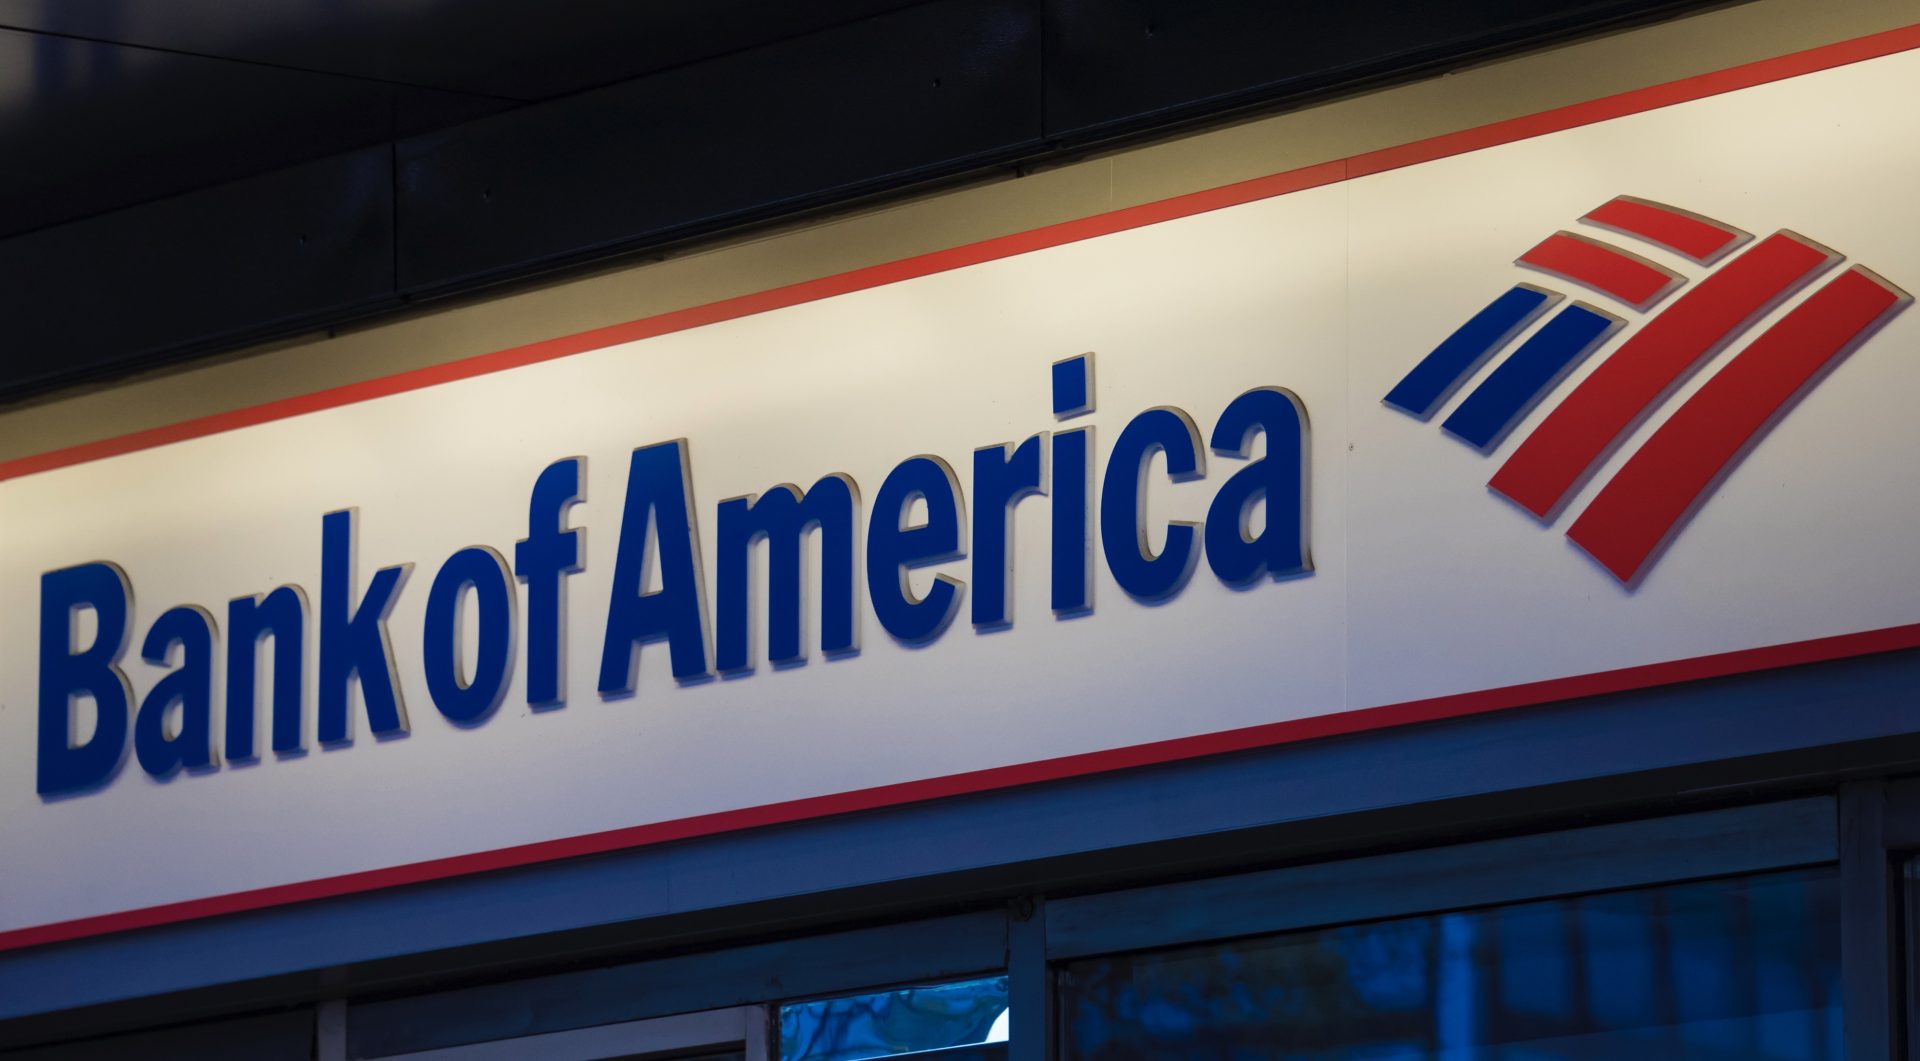 Oop Bank Of America Ordered To Pay 250M For Double Dipping Illegally Making Fake Accounts scaled